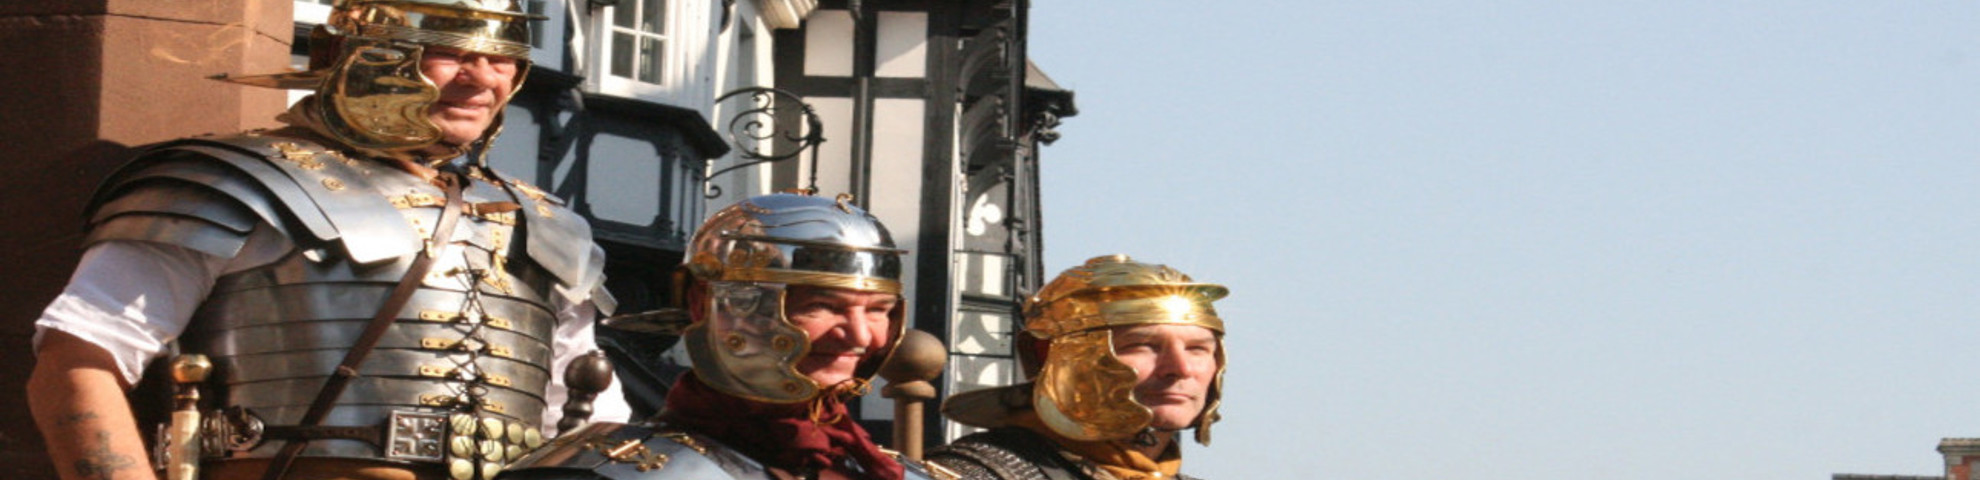 3 men dressed up as Romans at Chester.